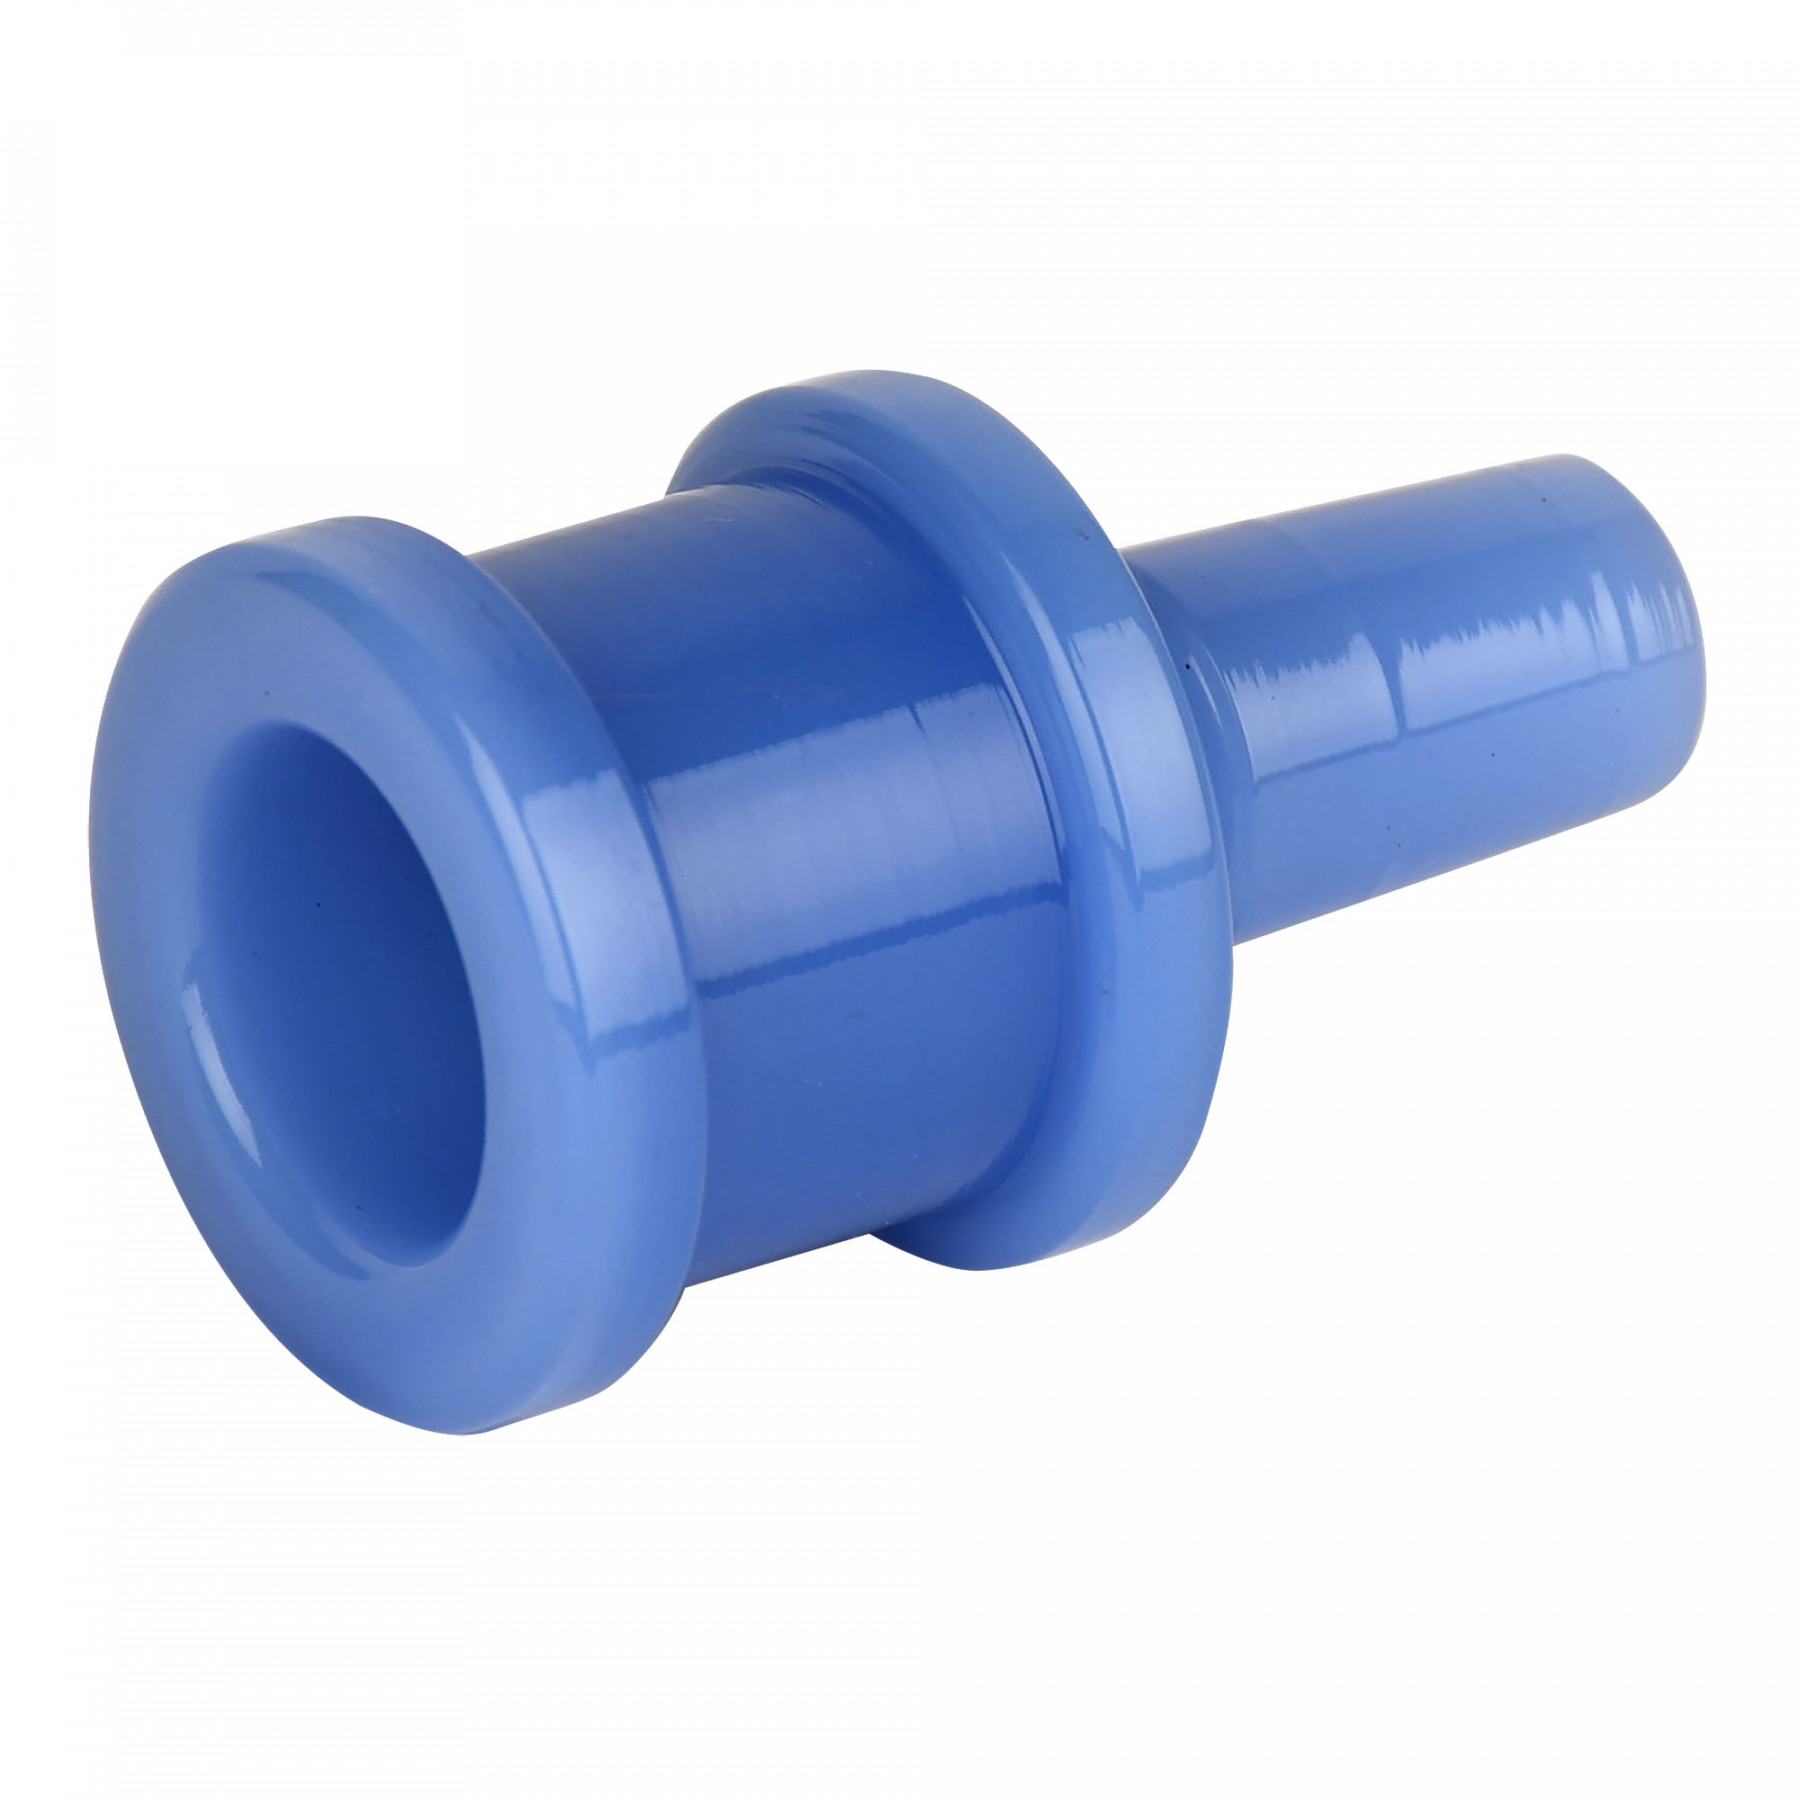 GEAR Premium 14mm Extra Large Sugar Barrel Pull-Out- Periwinkle